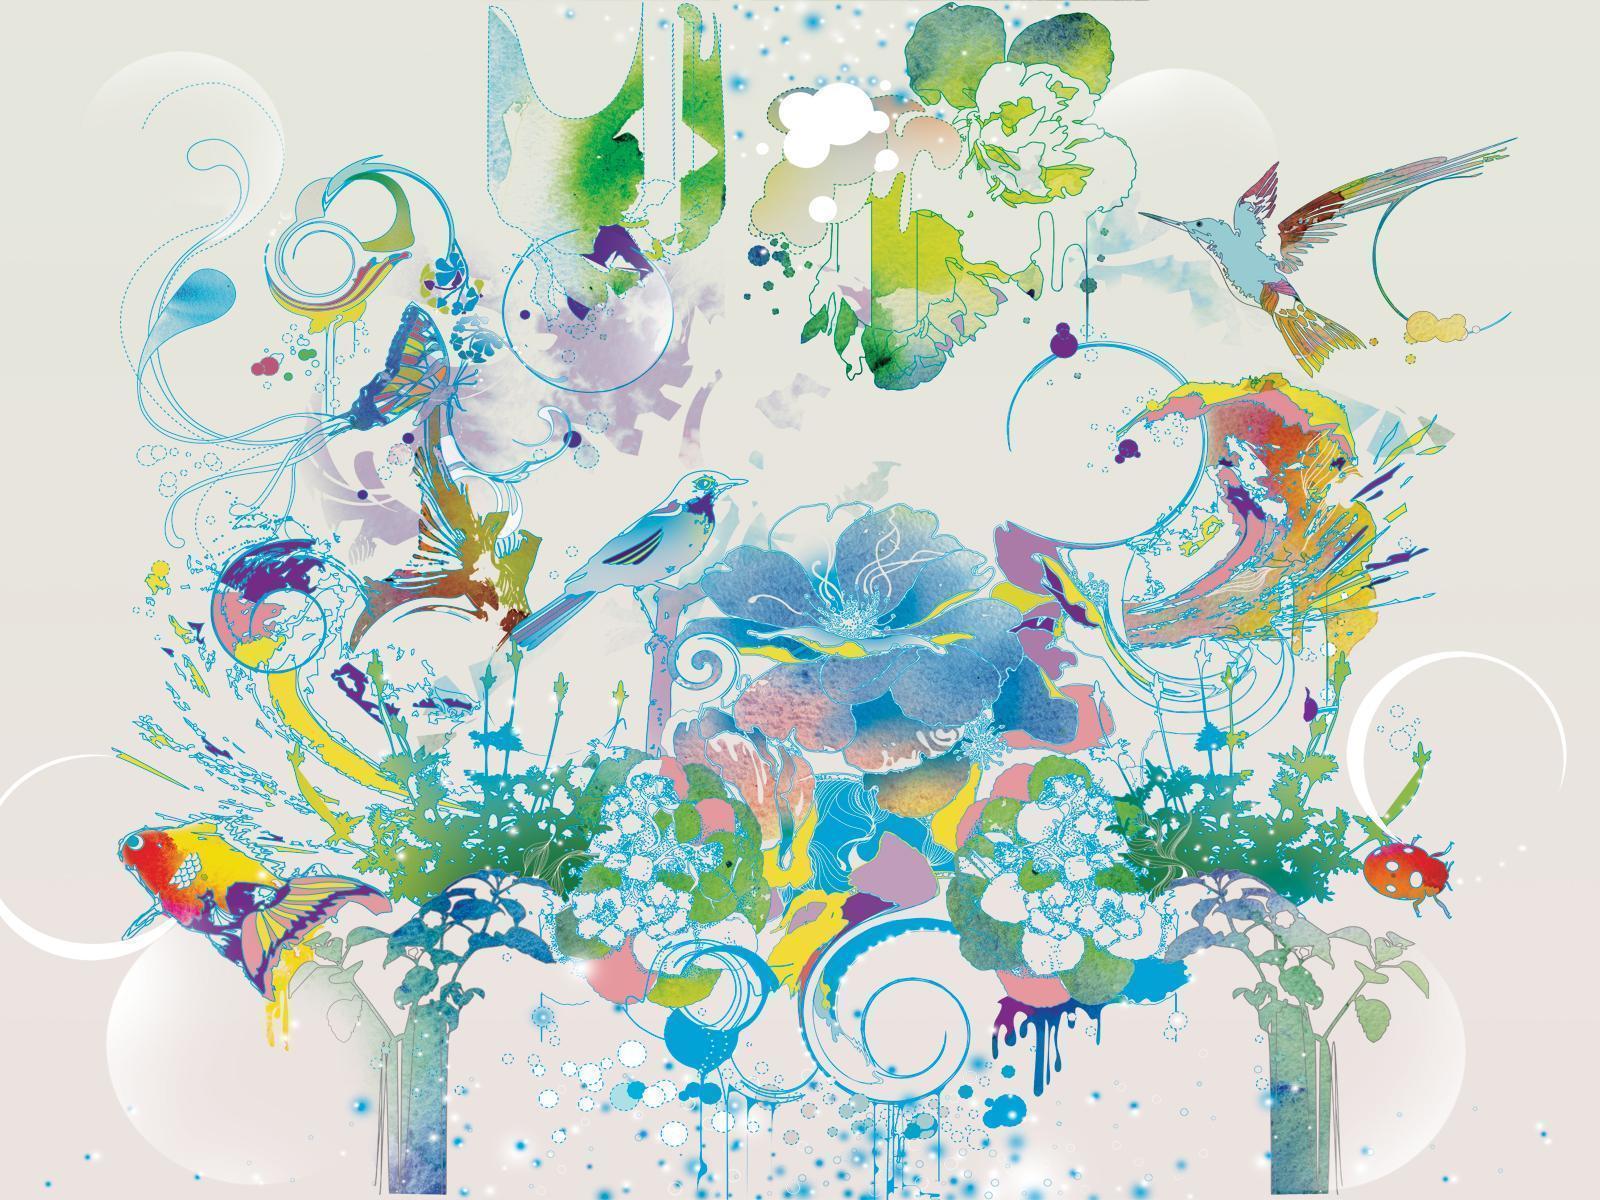 Abstract Watercolor Background 1 HD Wallpaper. lzamgs